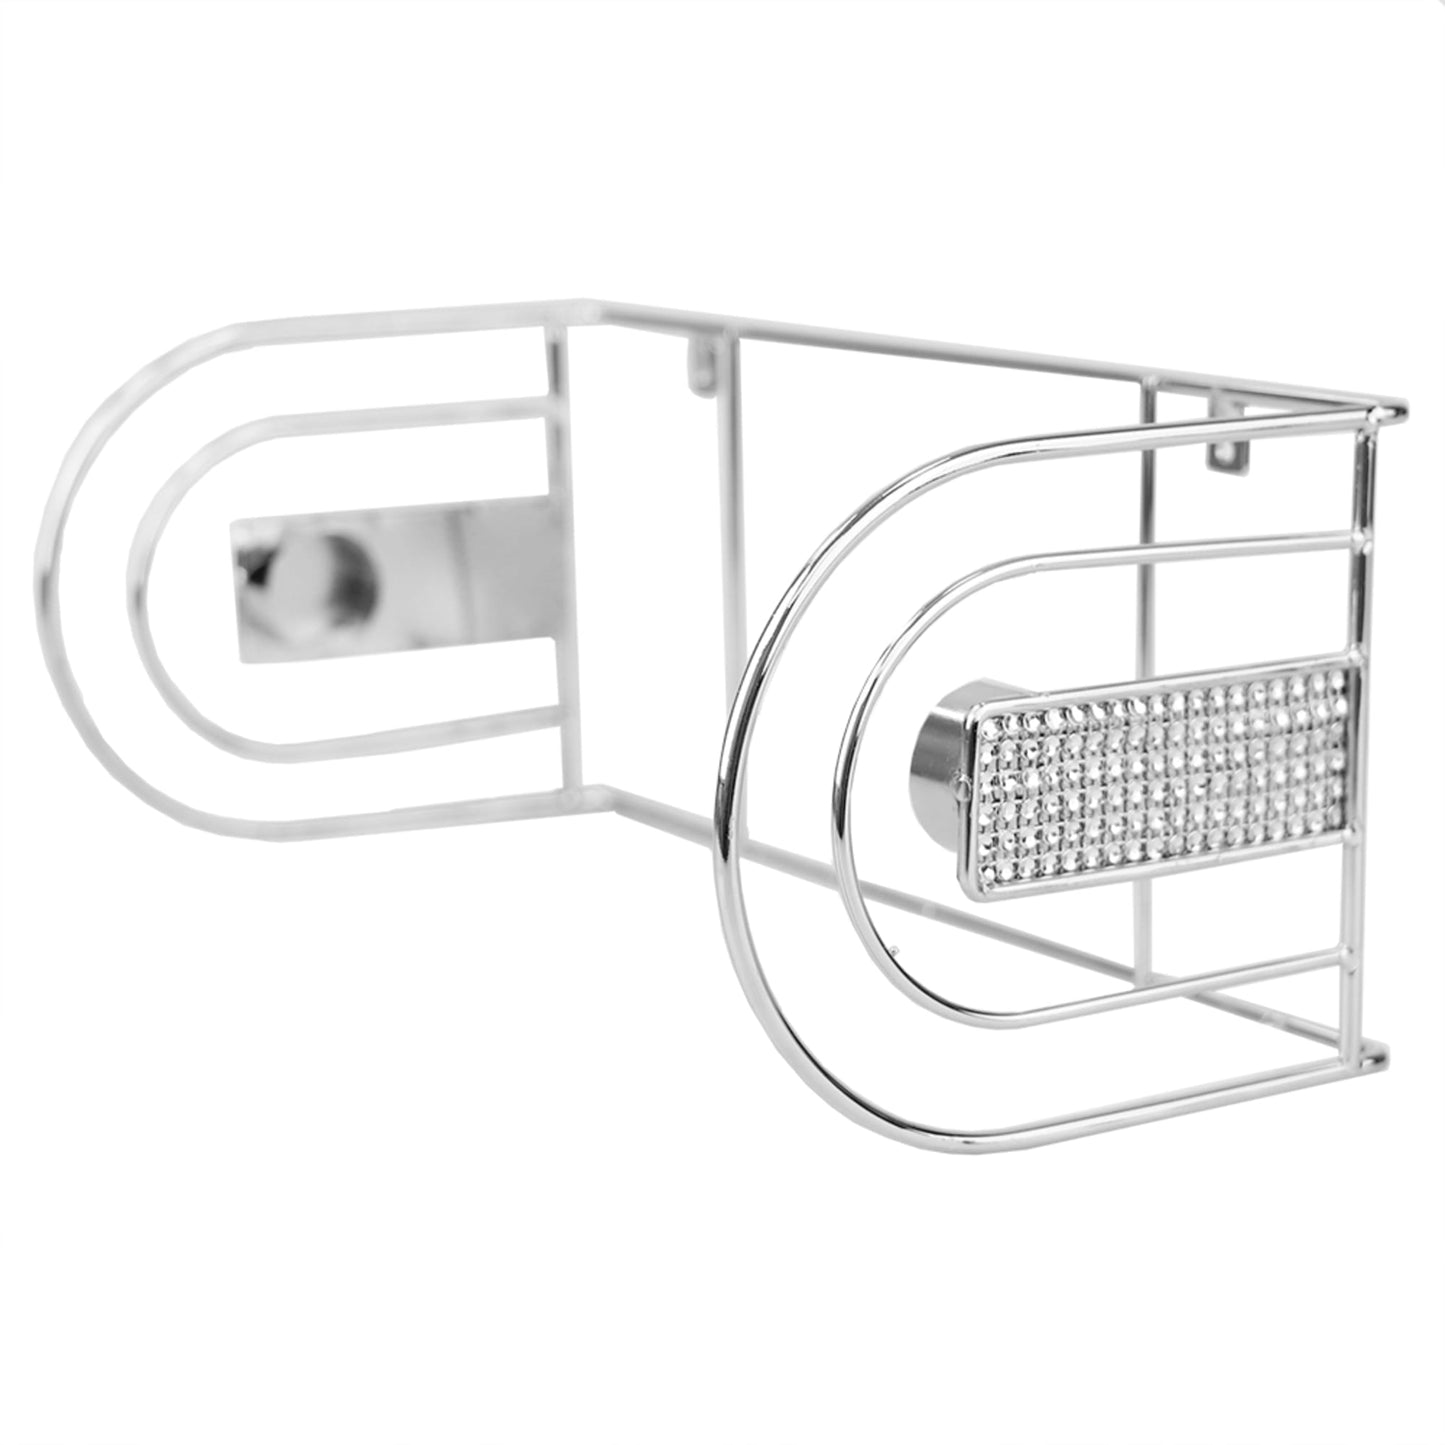 Pave Wall Mounted Steel Paper Towel Holder, Chrome